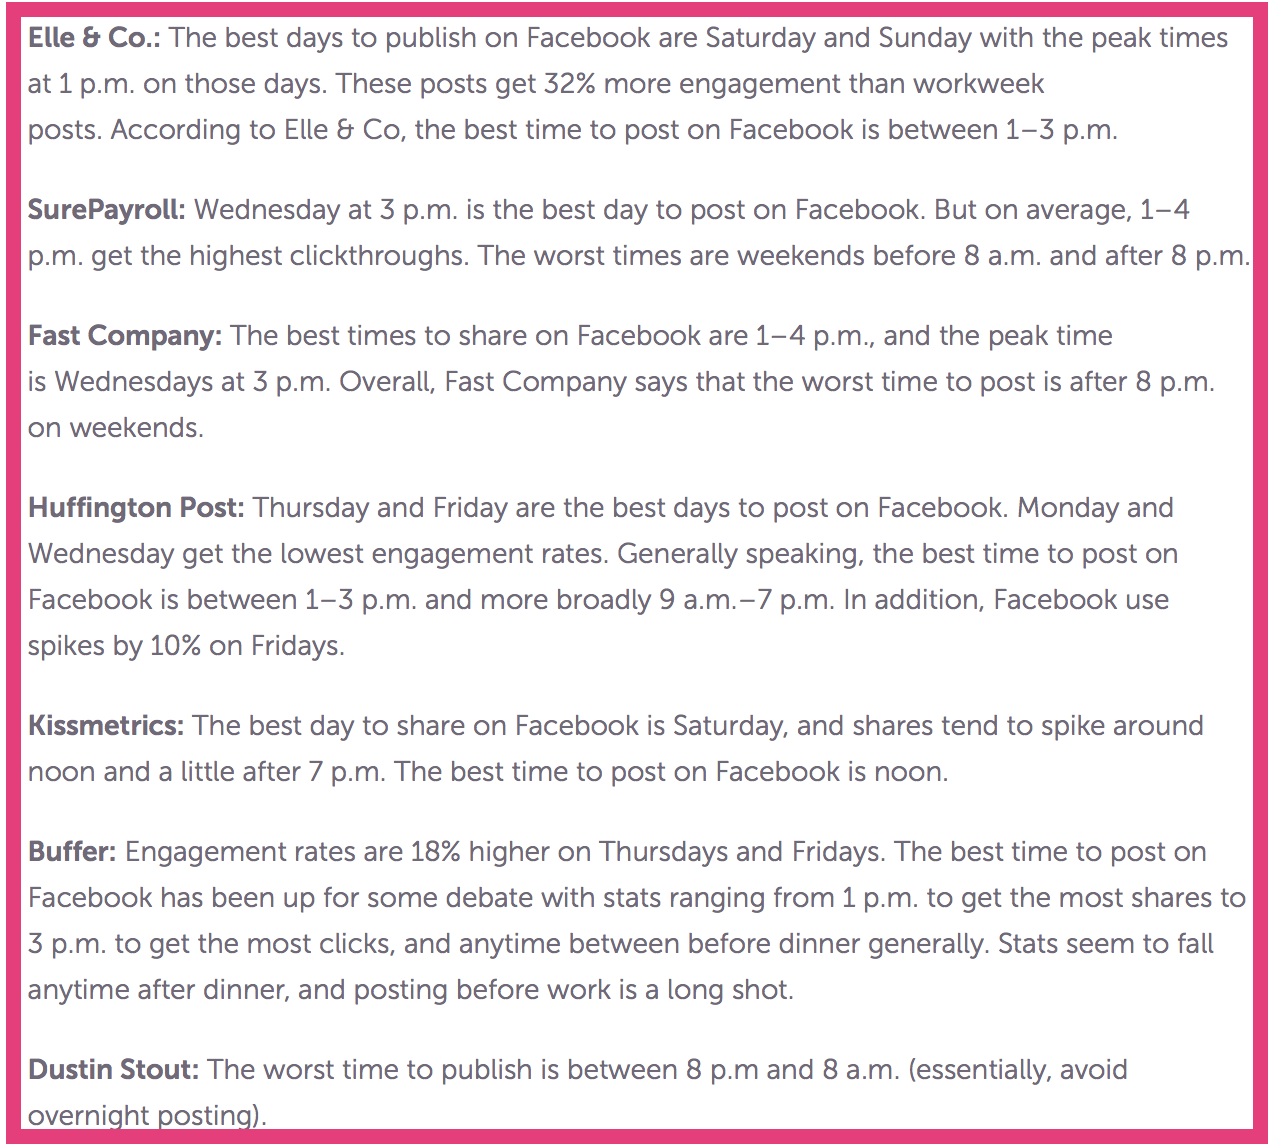 increase facebook organic reach the best times to post " width="635" height="572